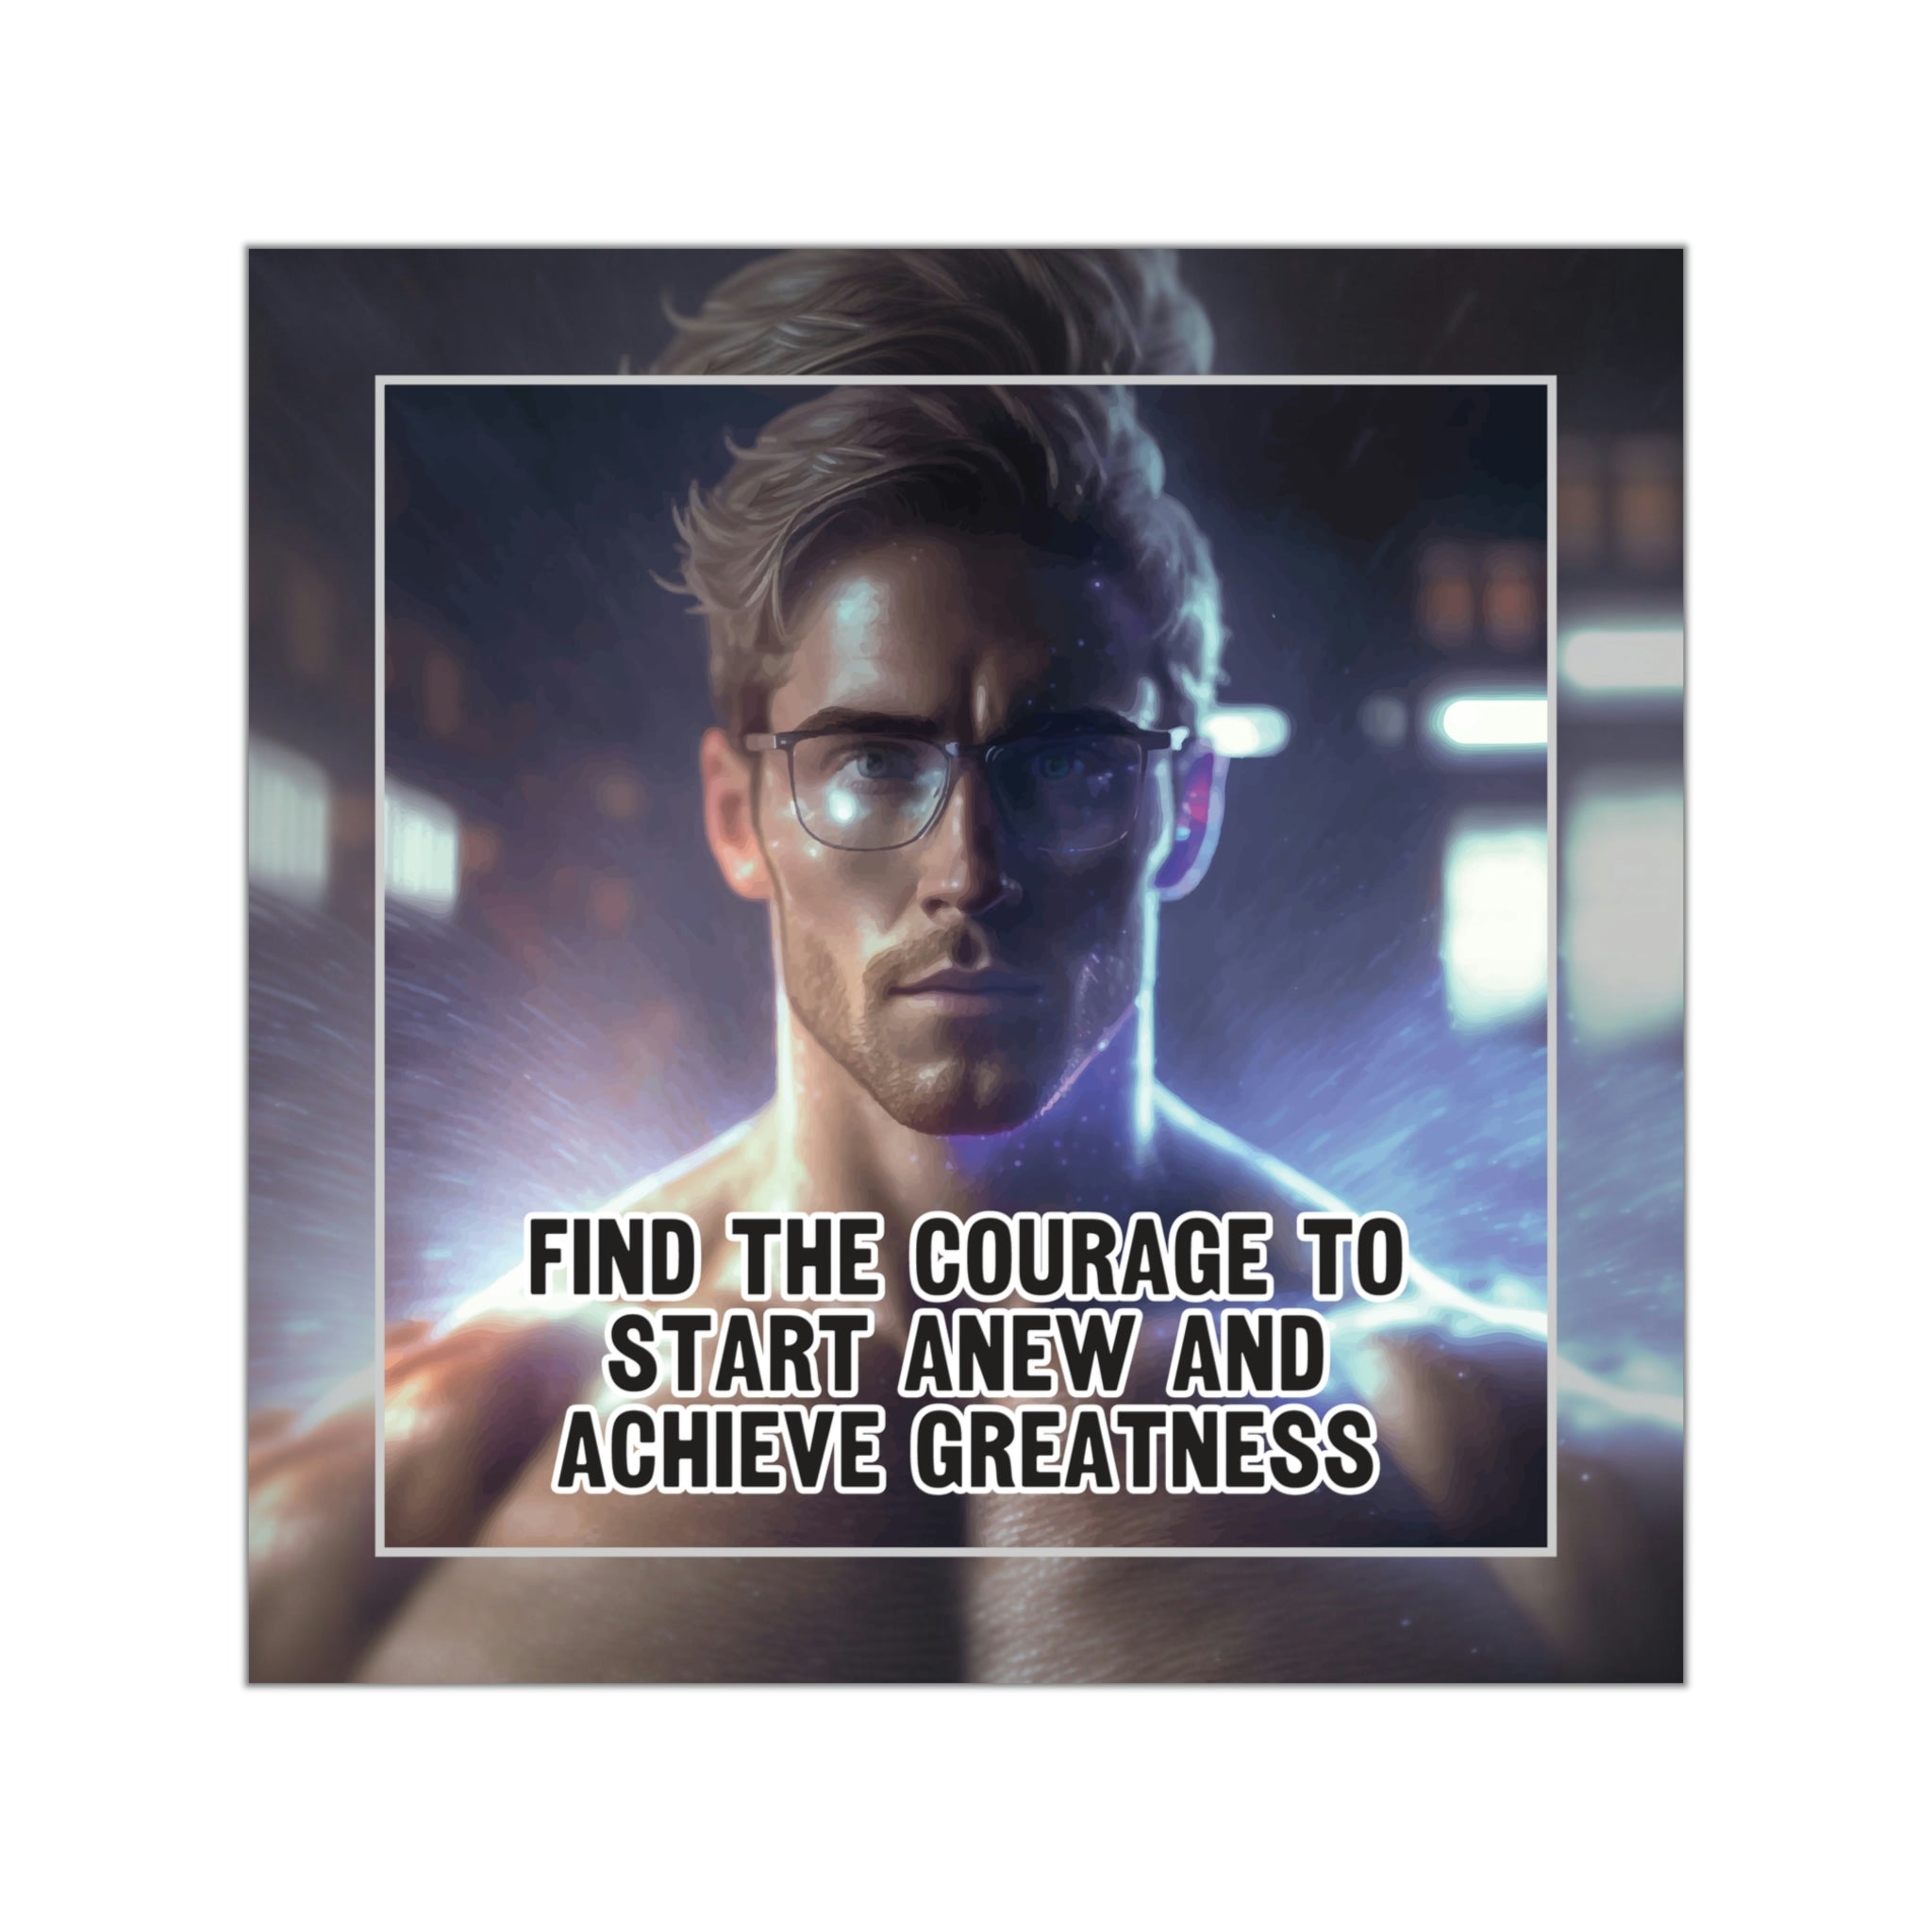 Achieving Greatness Starts with This Inspiring Square Sticker! #size_5x5-inches